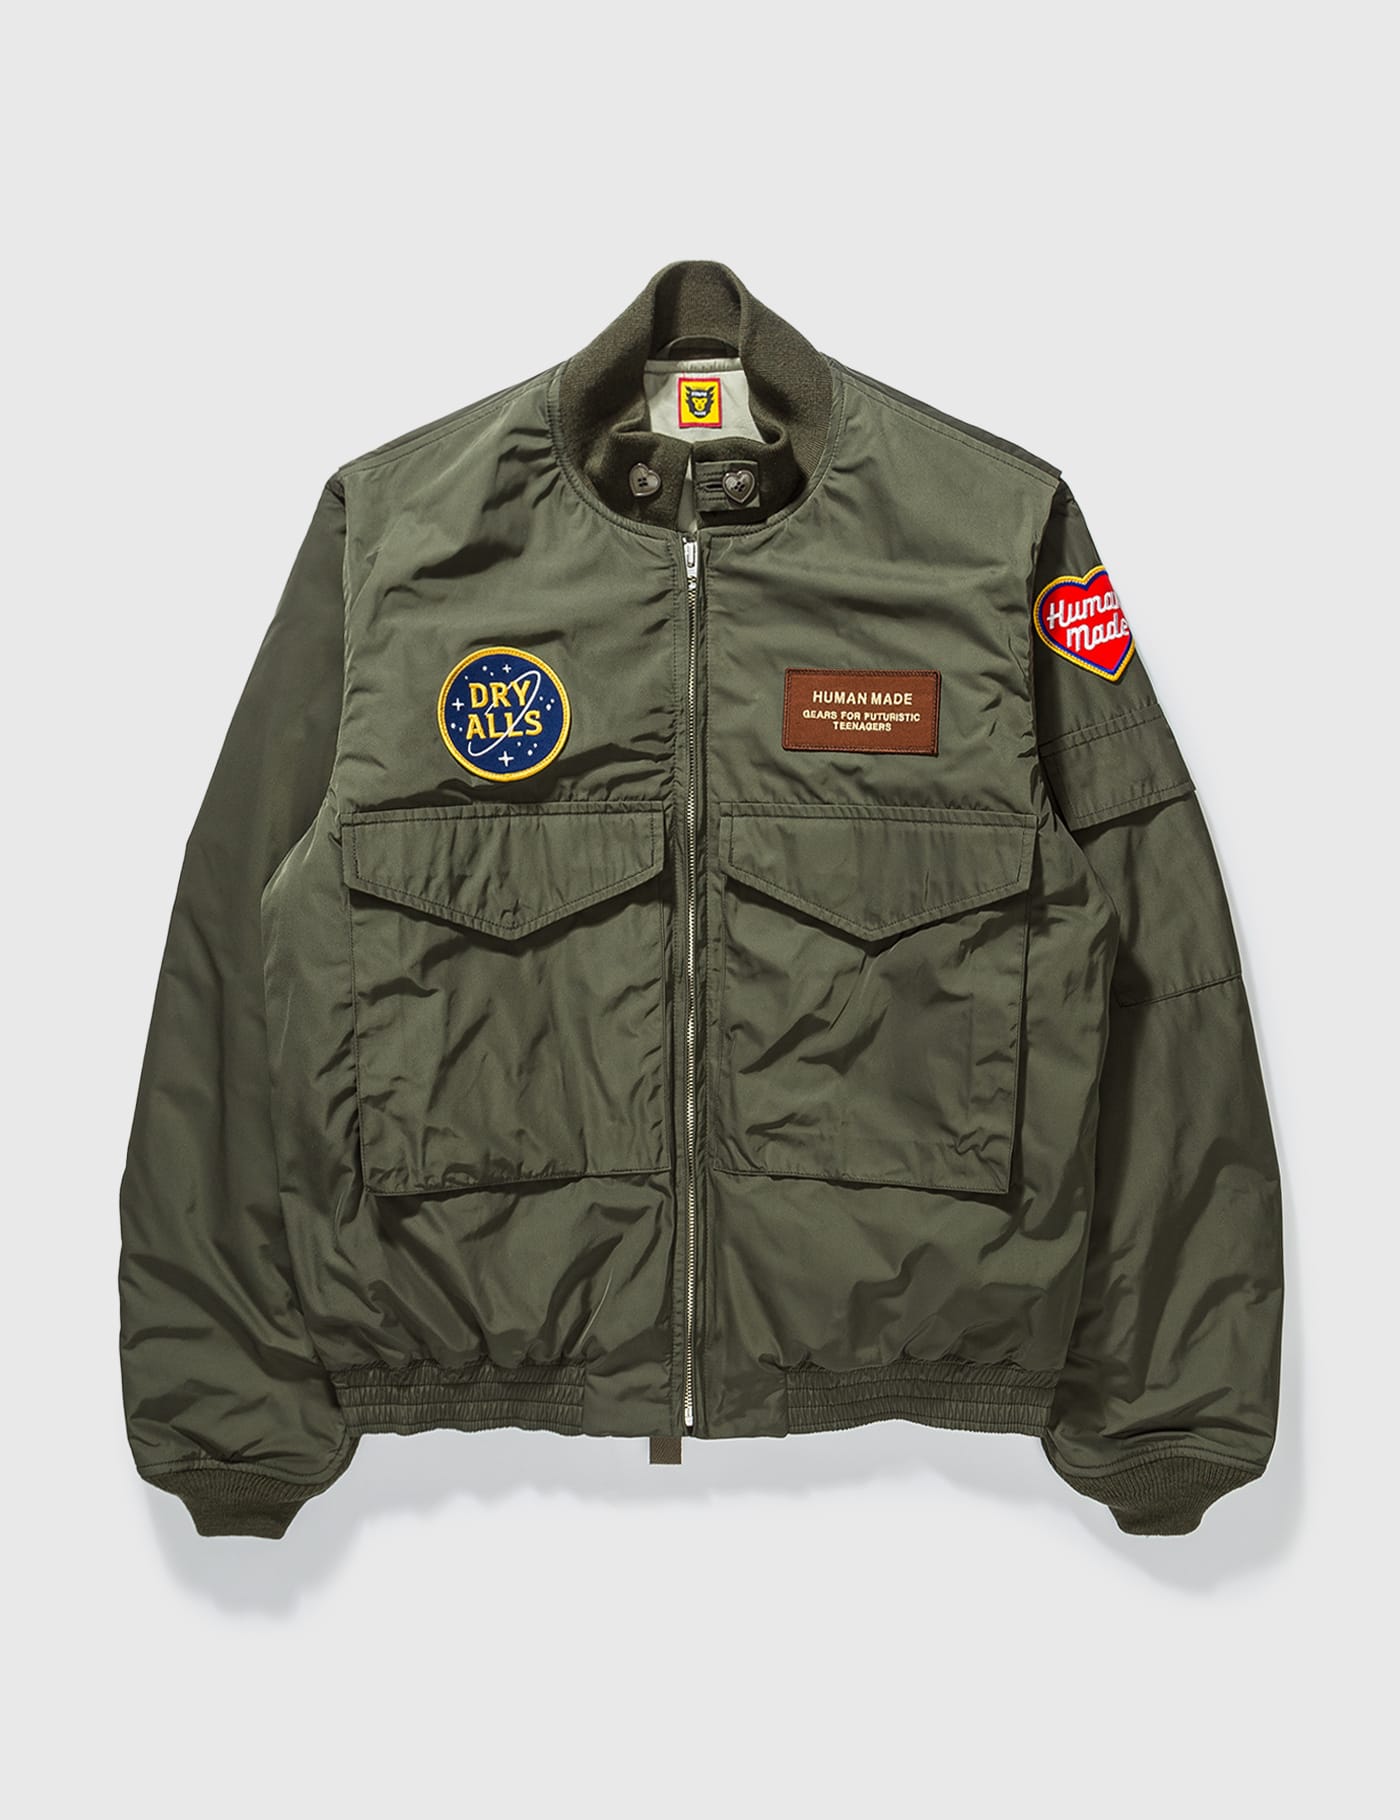 Human Made - Flight Jacket | HBX - Globally Curated Fashion and